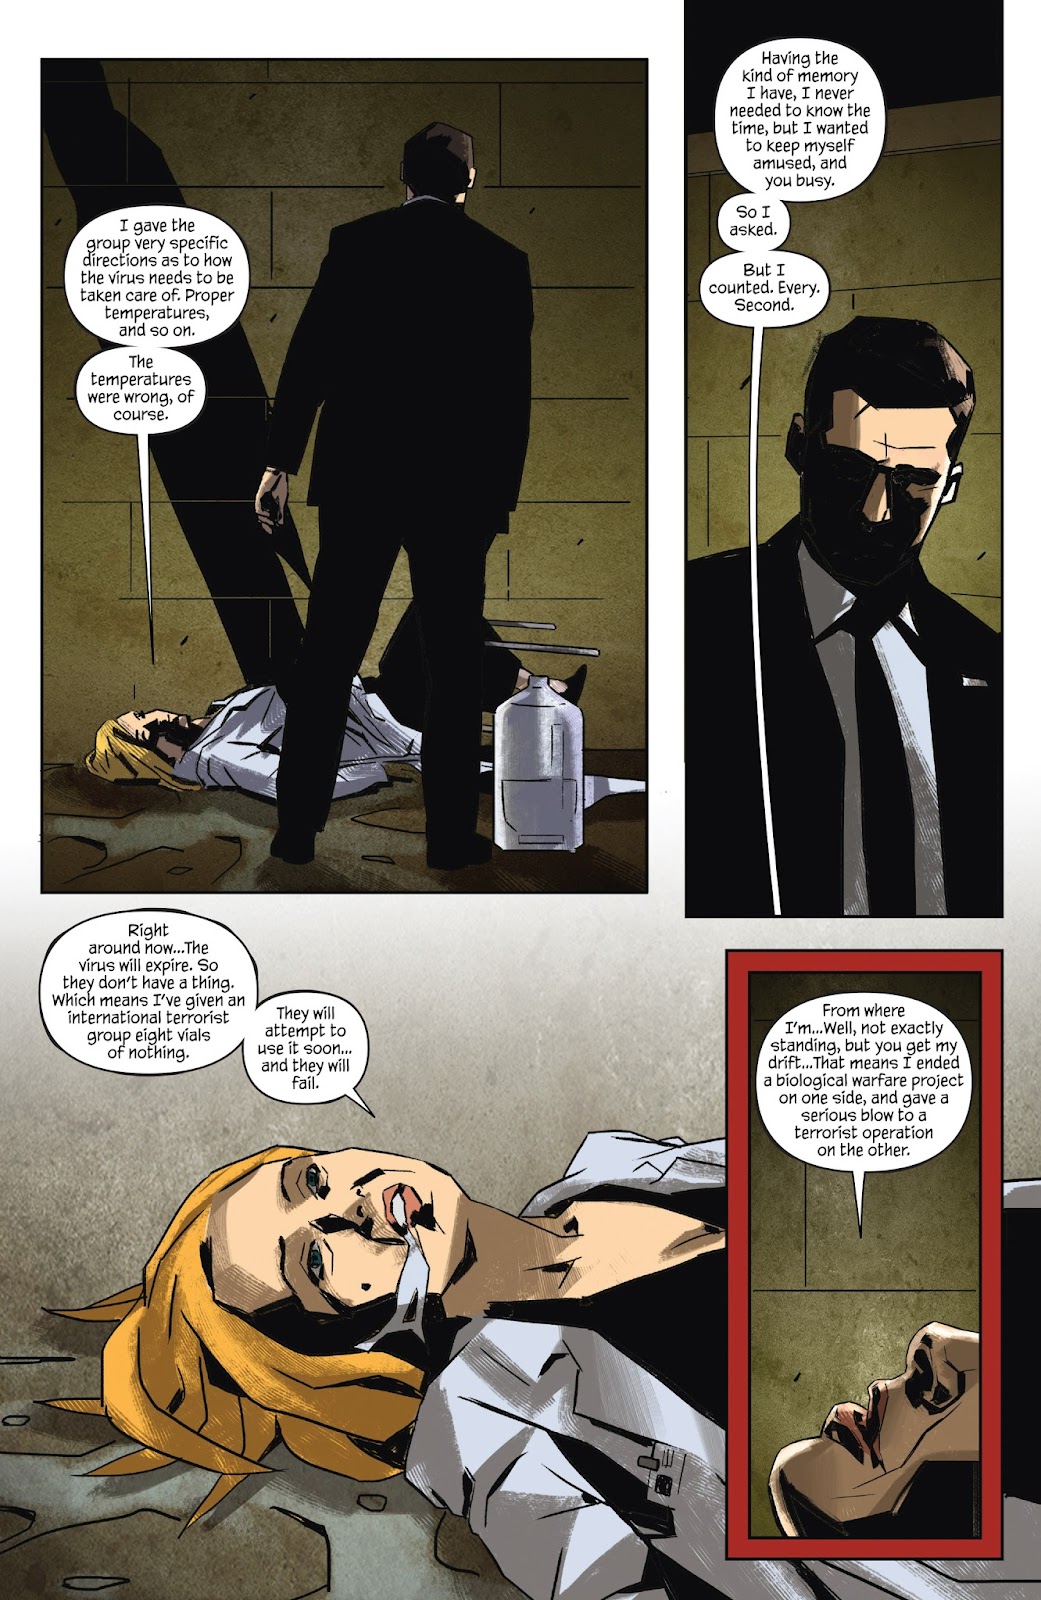 James Bond: The Body issue 2 - Page 20